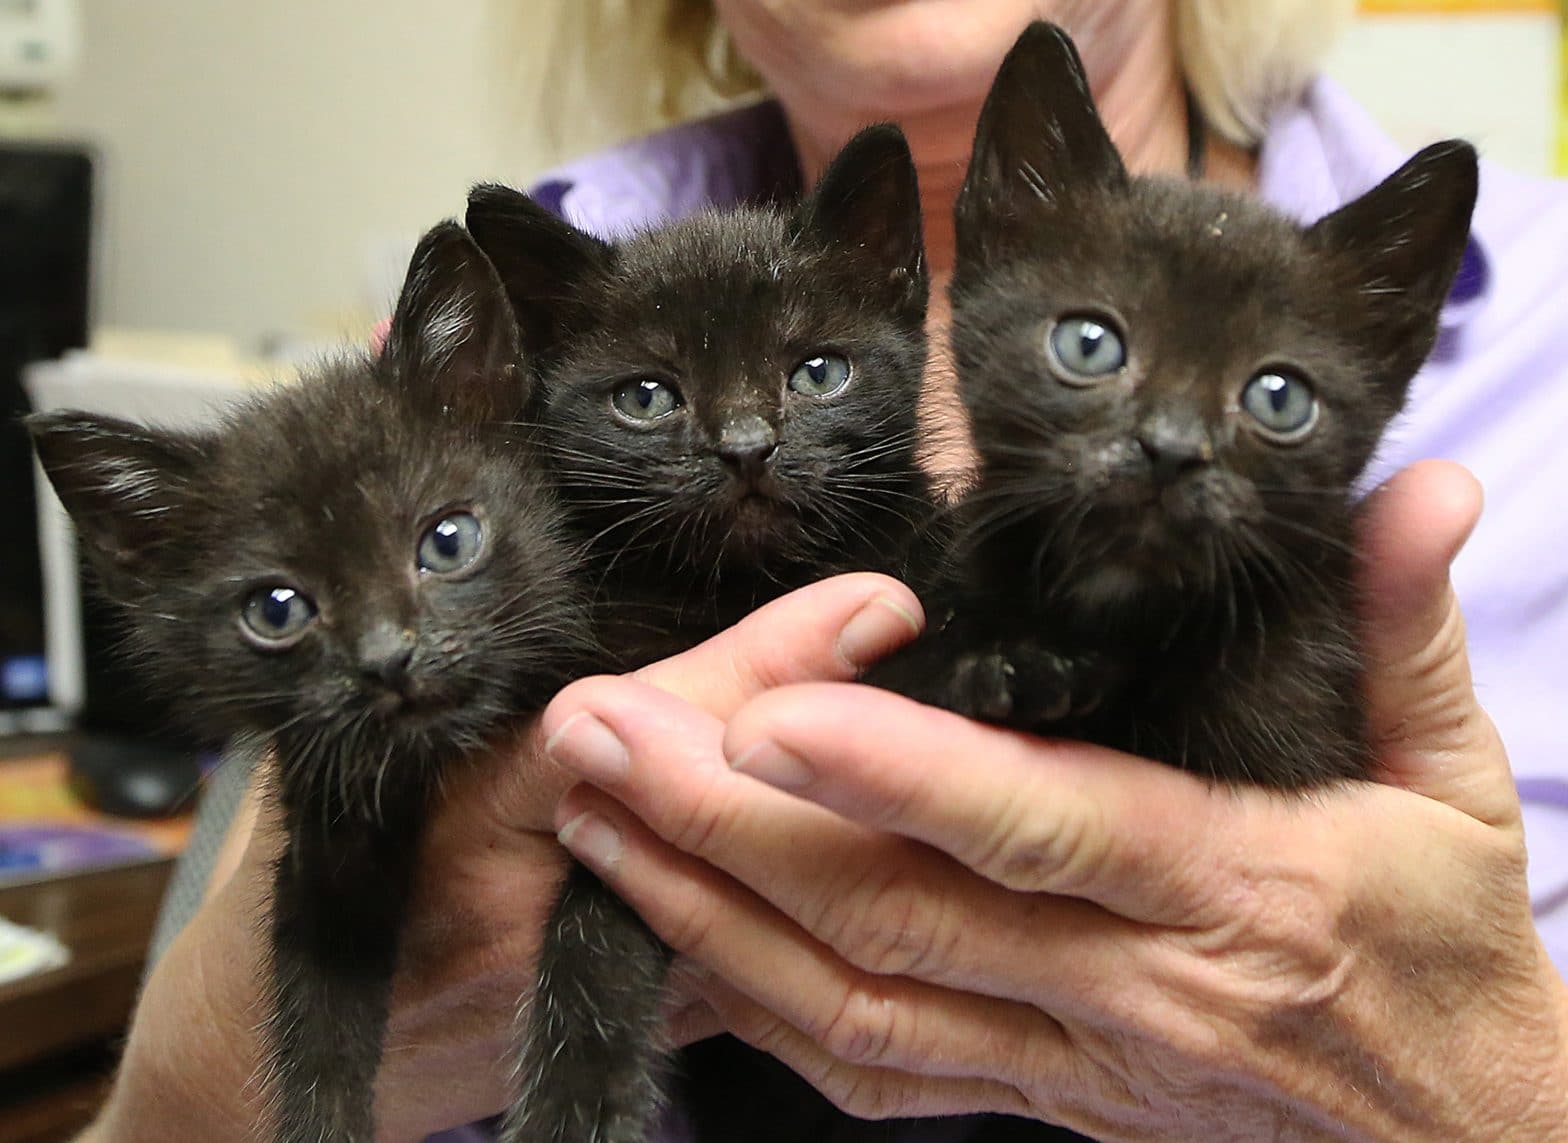 KITTEN Act an Important Step to End Taxpayer-Funded Kitten Slaughter